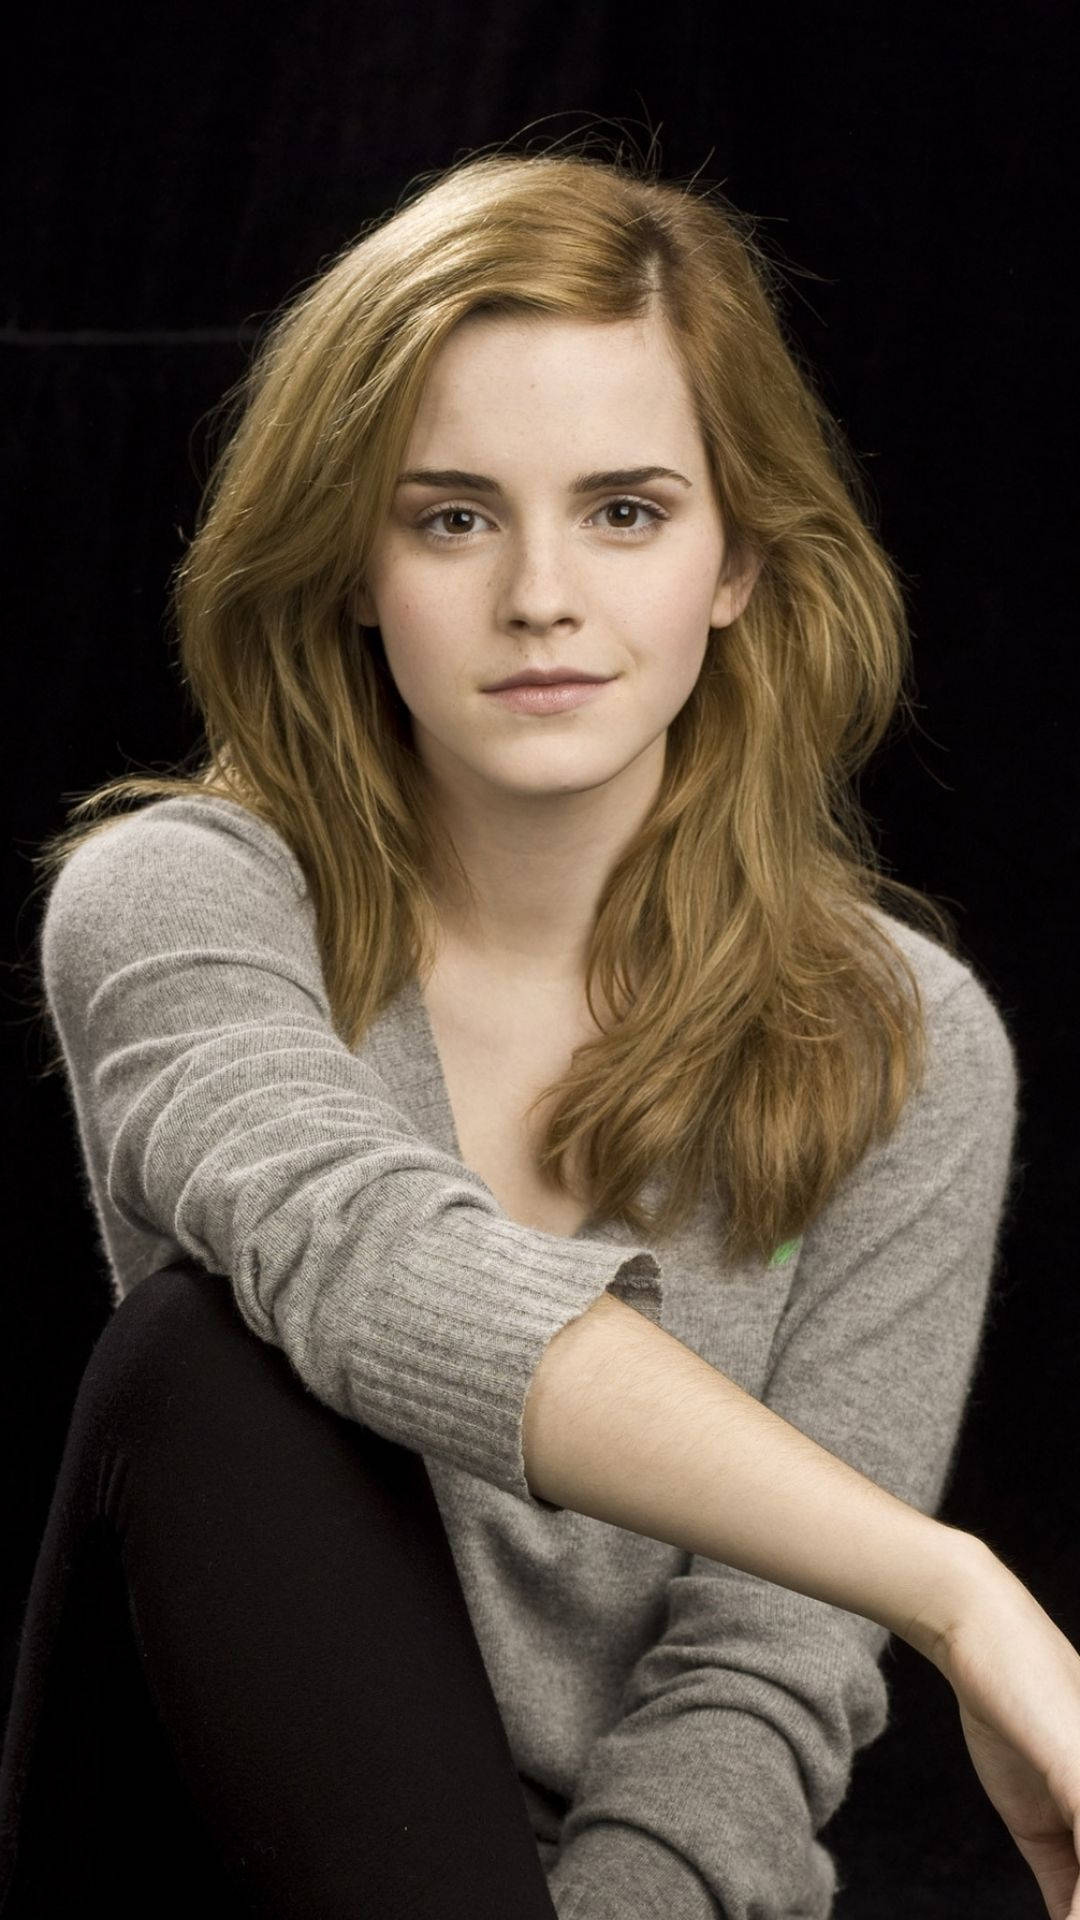 Emma Watson Looking Stylish In A Casual Setting Background